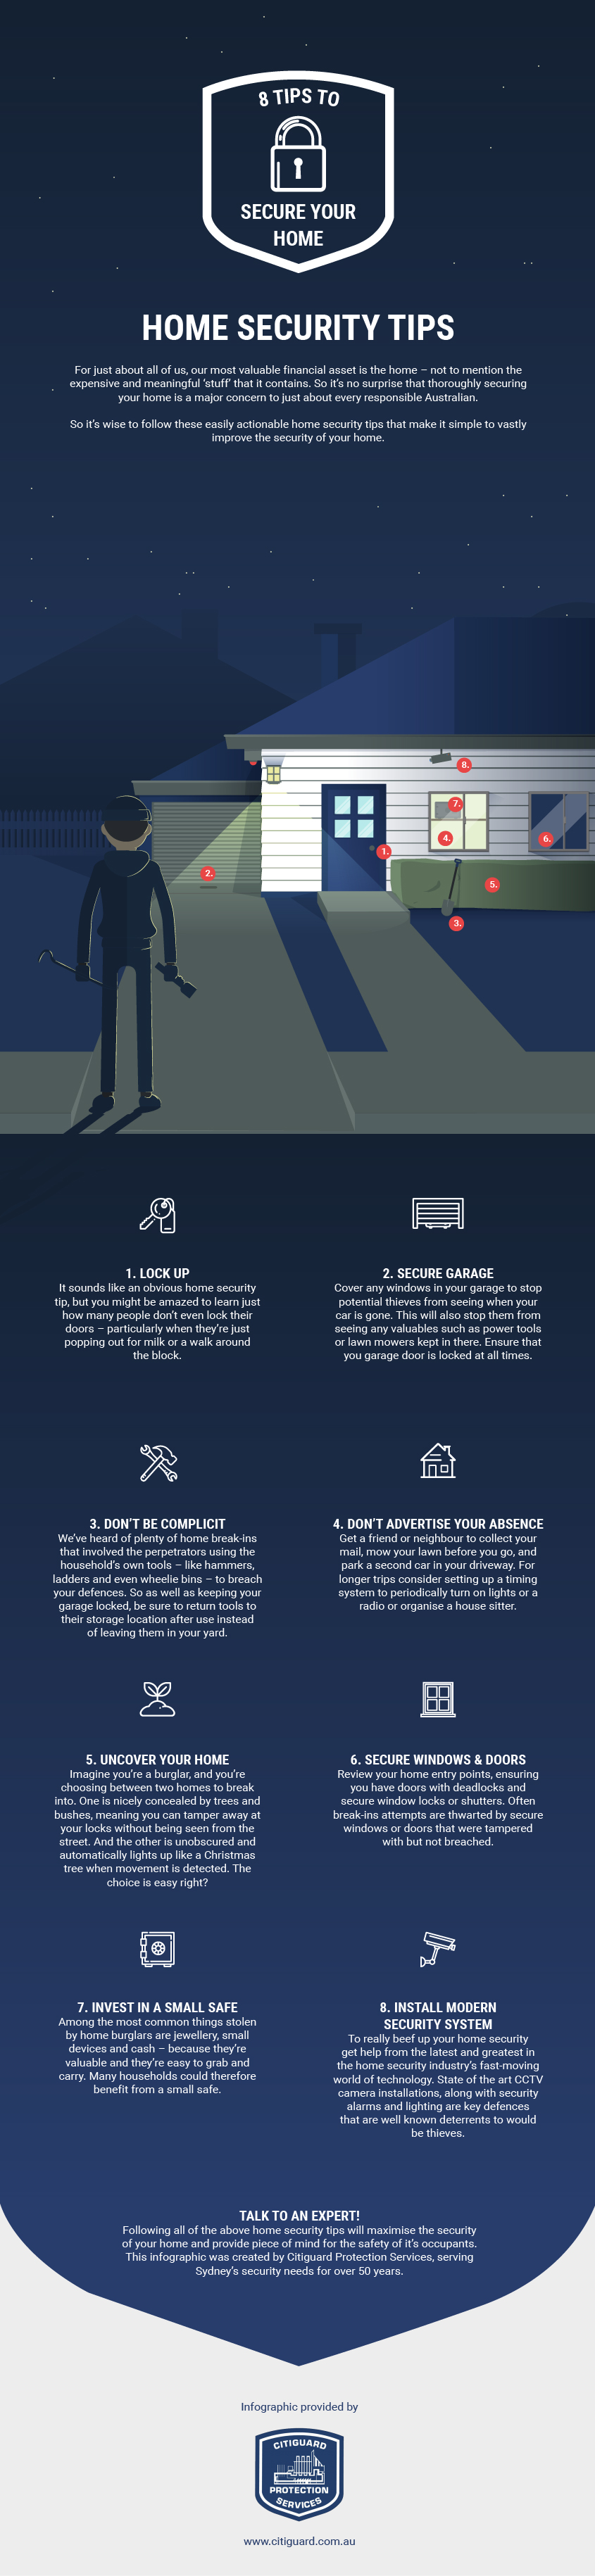 Home Security Tips Infographic